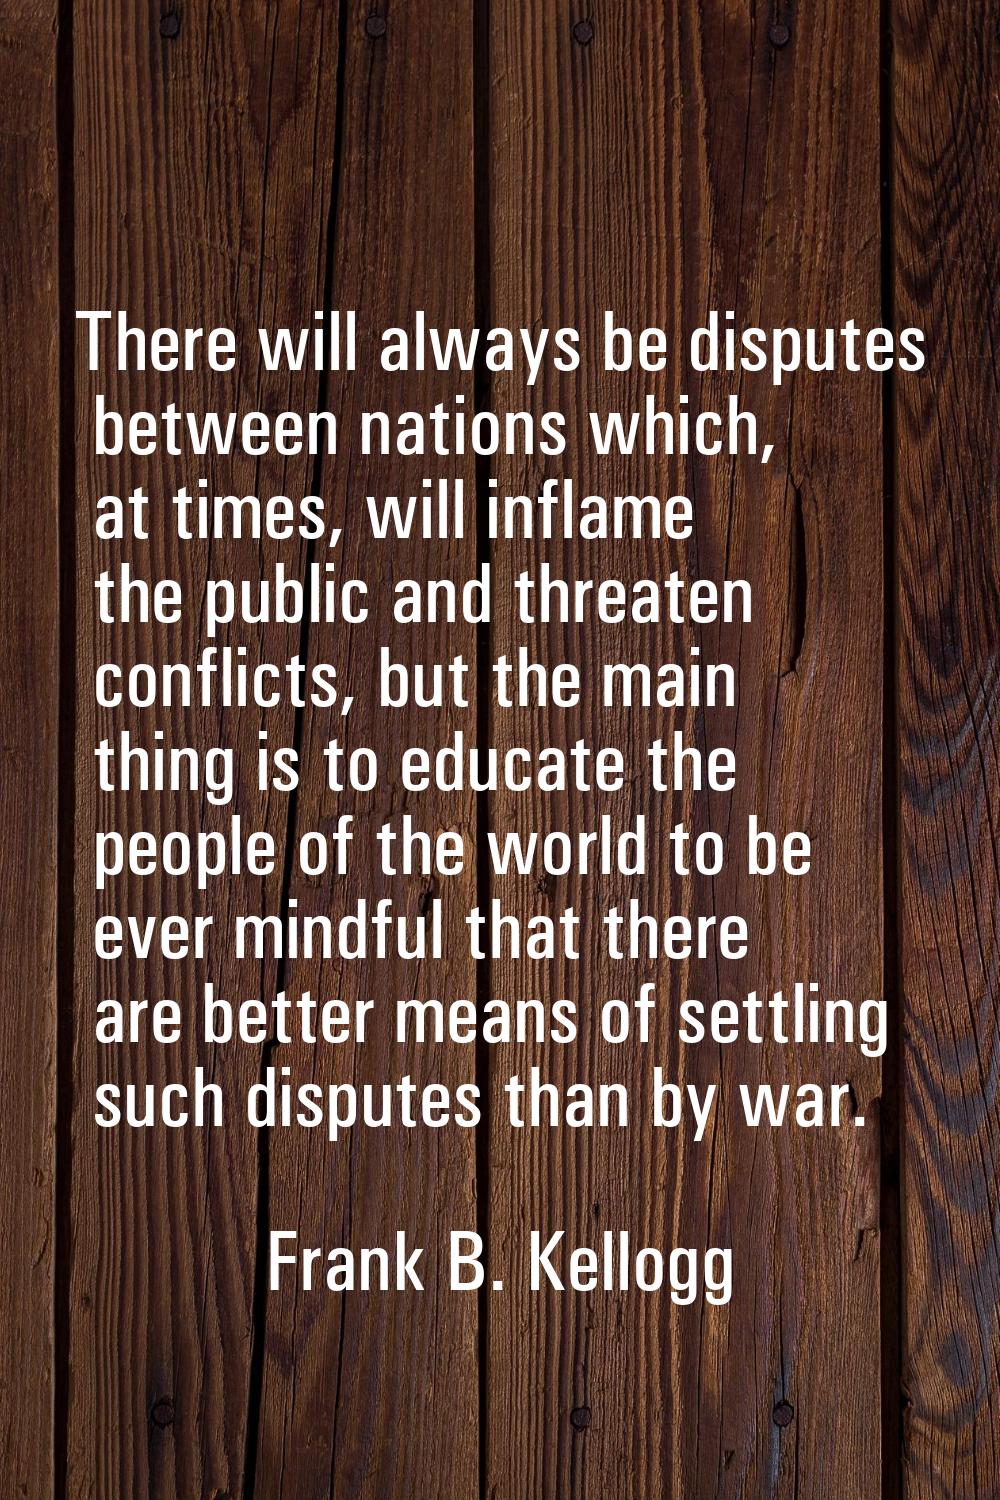 There will always be disputes between nations which, at times, will inflame the public and threaten